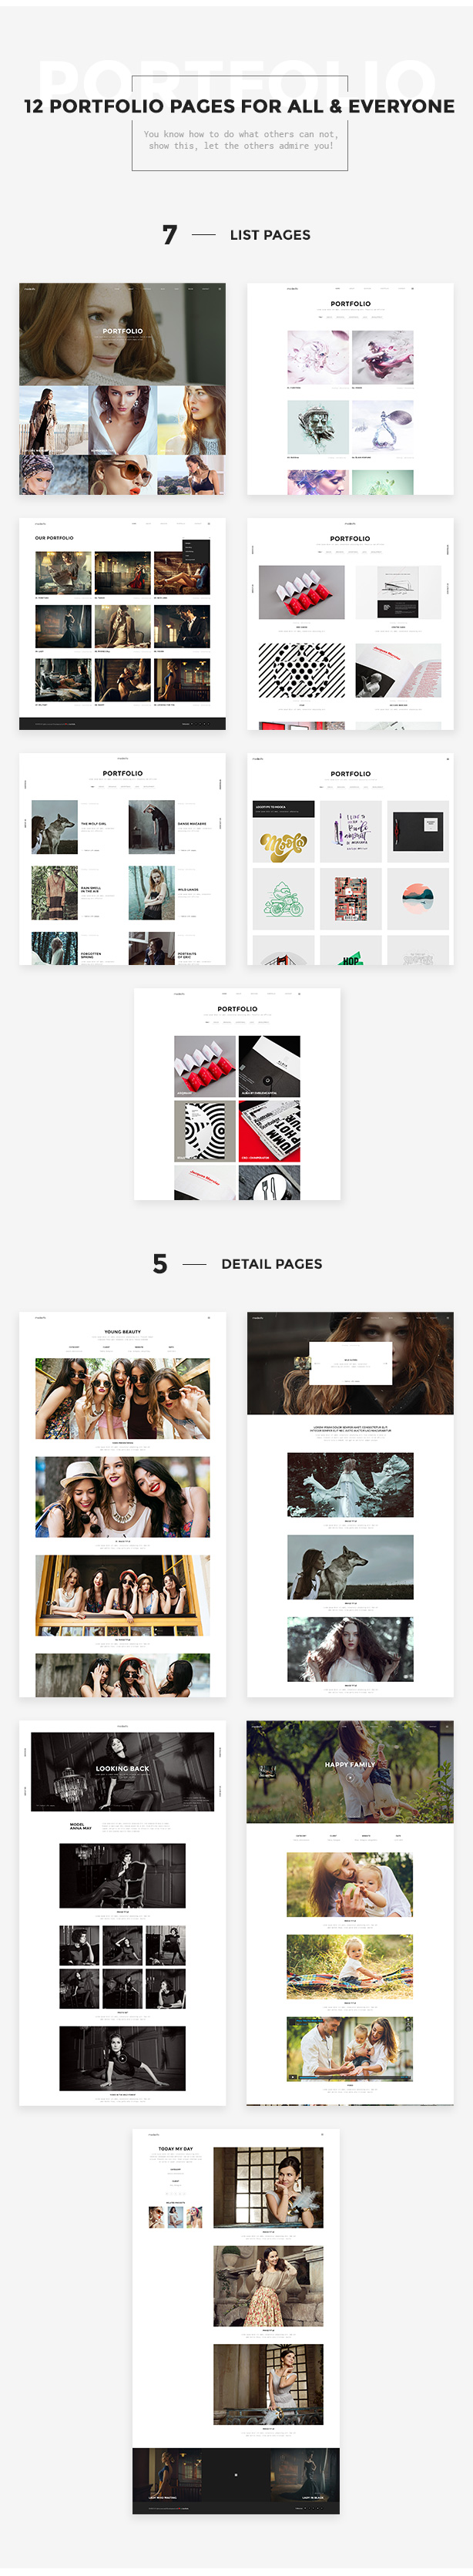 12 Portfolio Pages for all & everyone